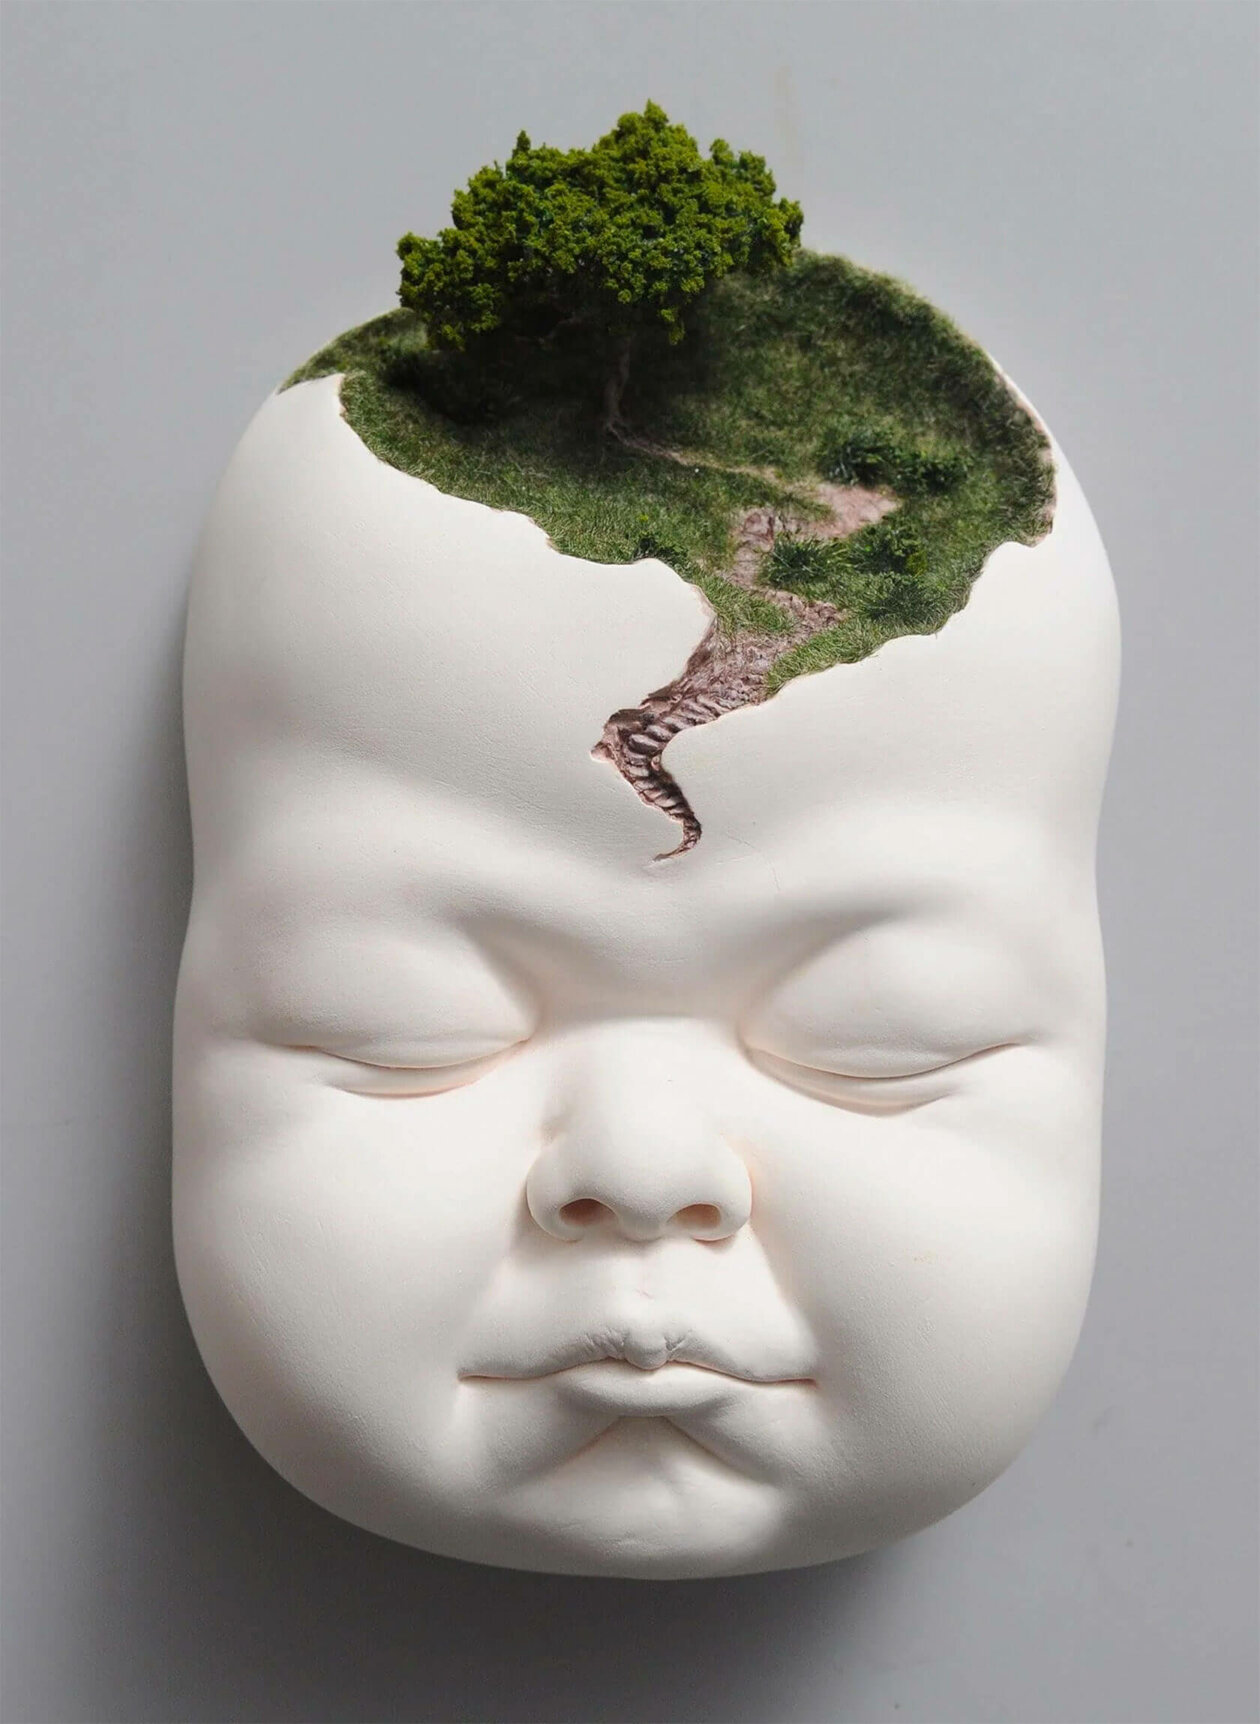 Distorted Baby Faces, Surreal Ceramic Sculptures By Johnson Tsang (21)